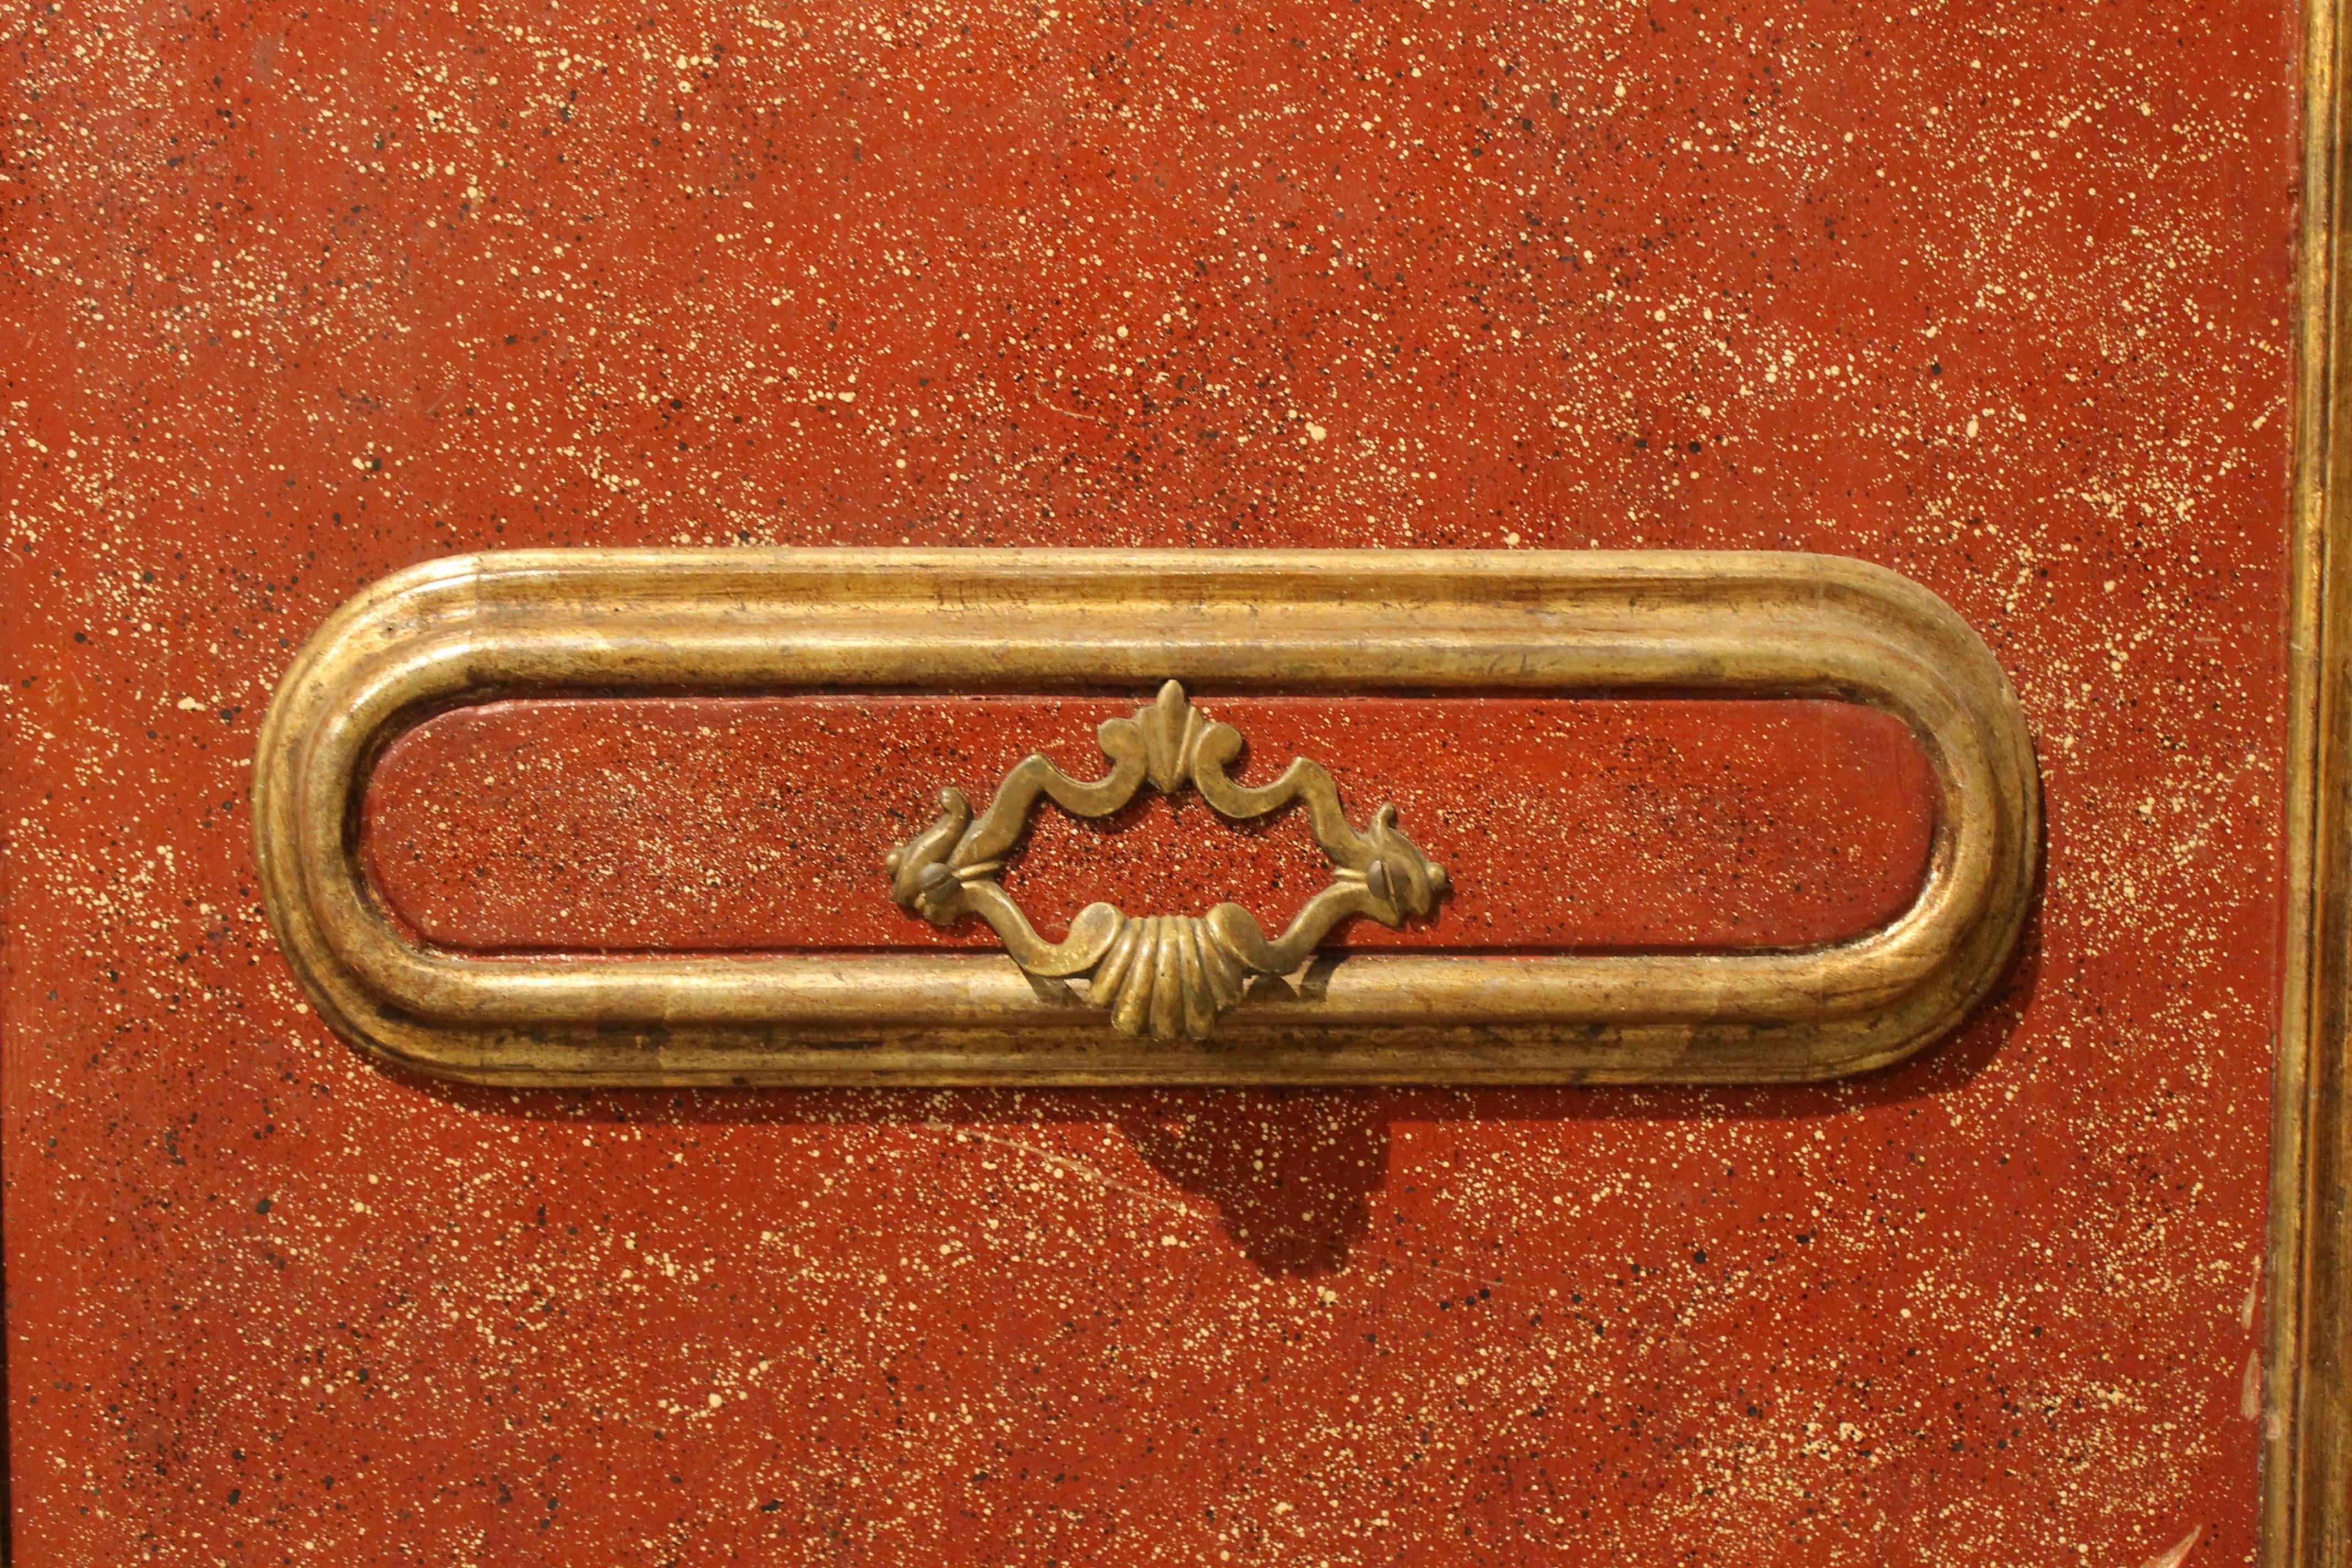 This Florentine late 19th-early 20th century double wood doors are lacquered as faux red porphyry with gold leaf details troughout. Original gilt brass handles. The doors open inward.
Provenance: Florentine private Villa.
Measures: Each door width